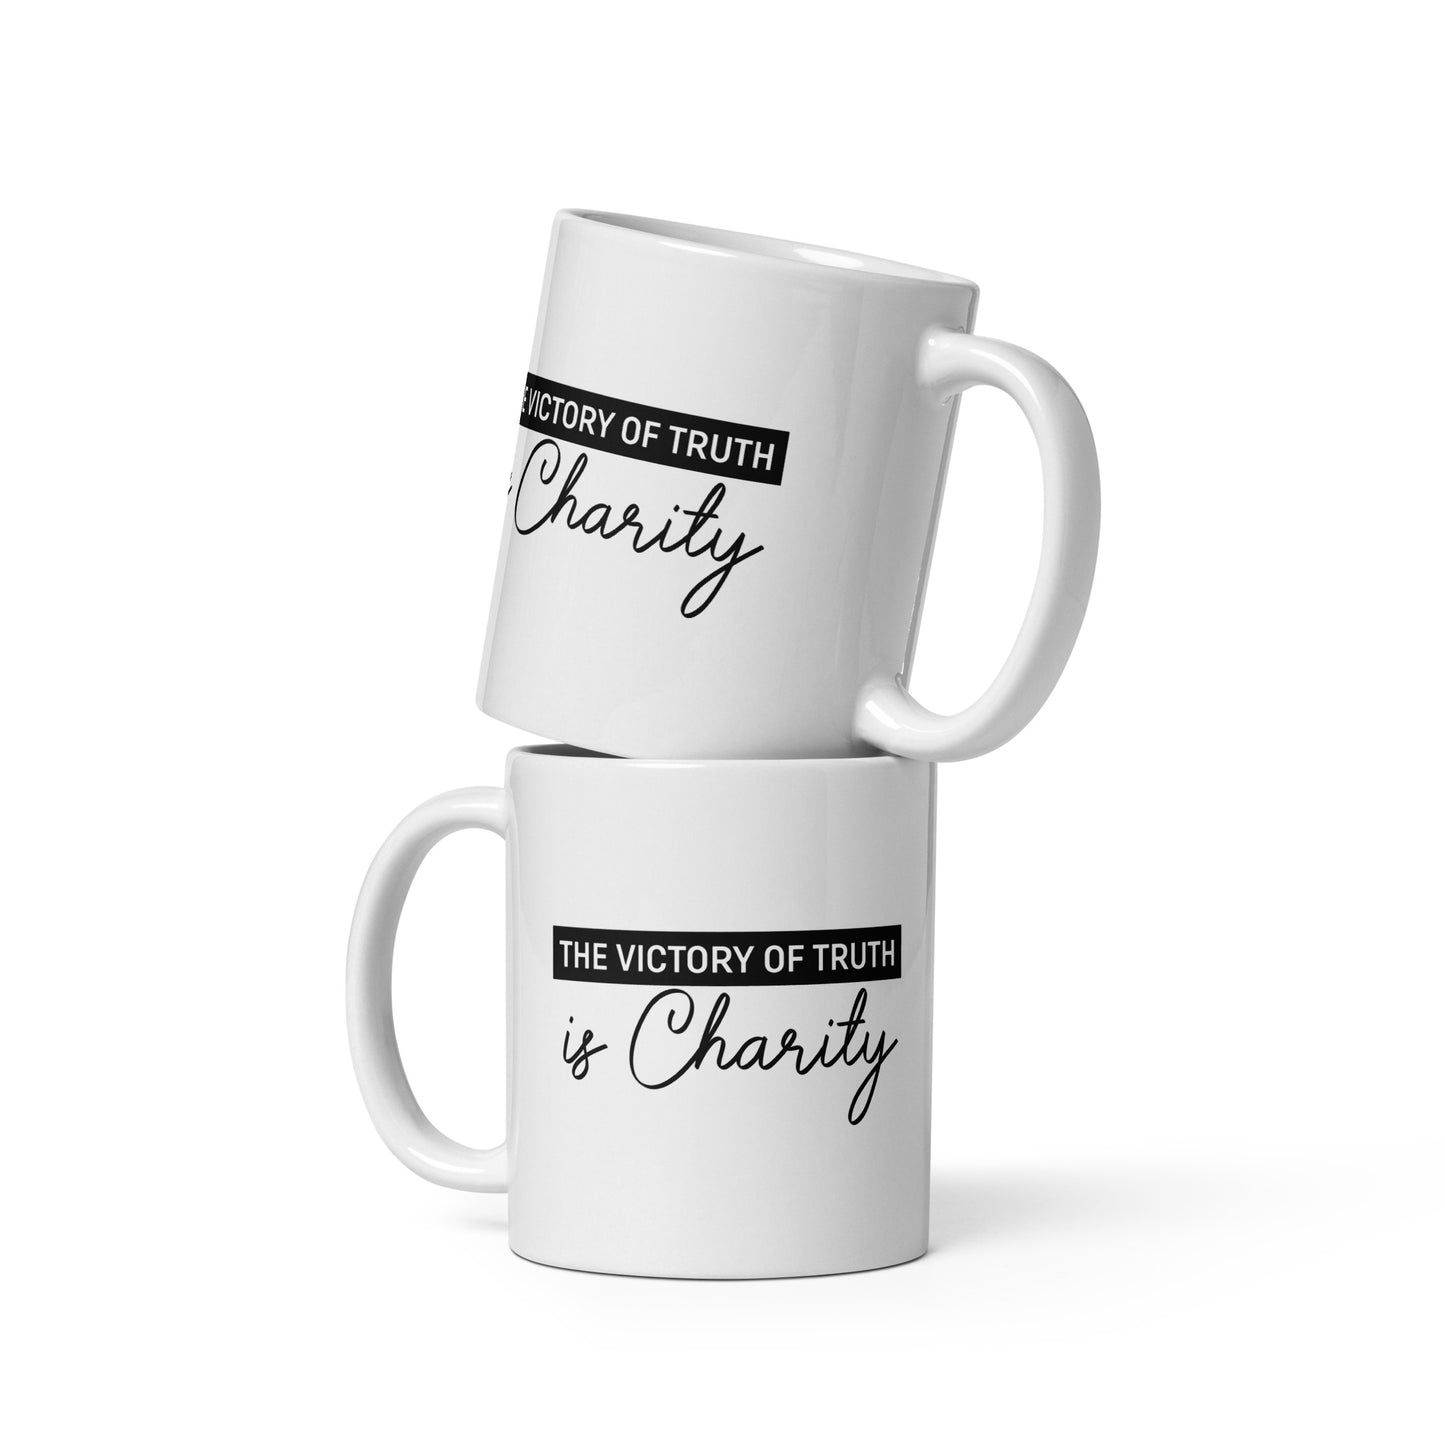 The Victory of Truth is Charity White glossy mug